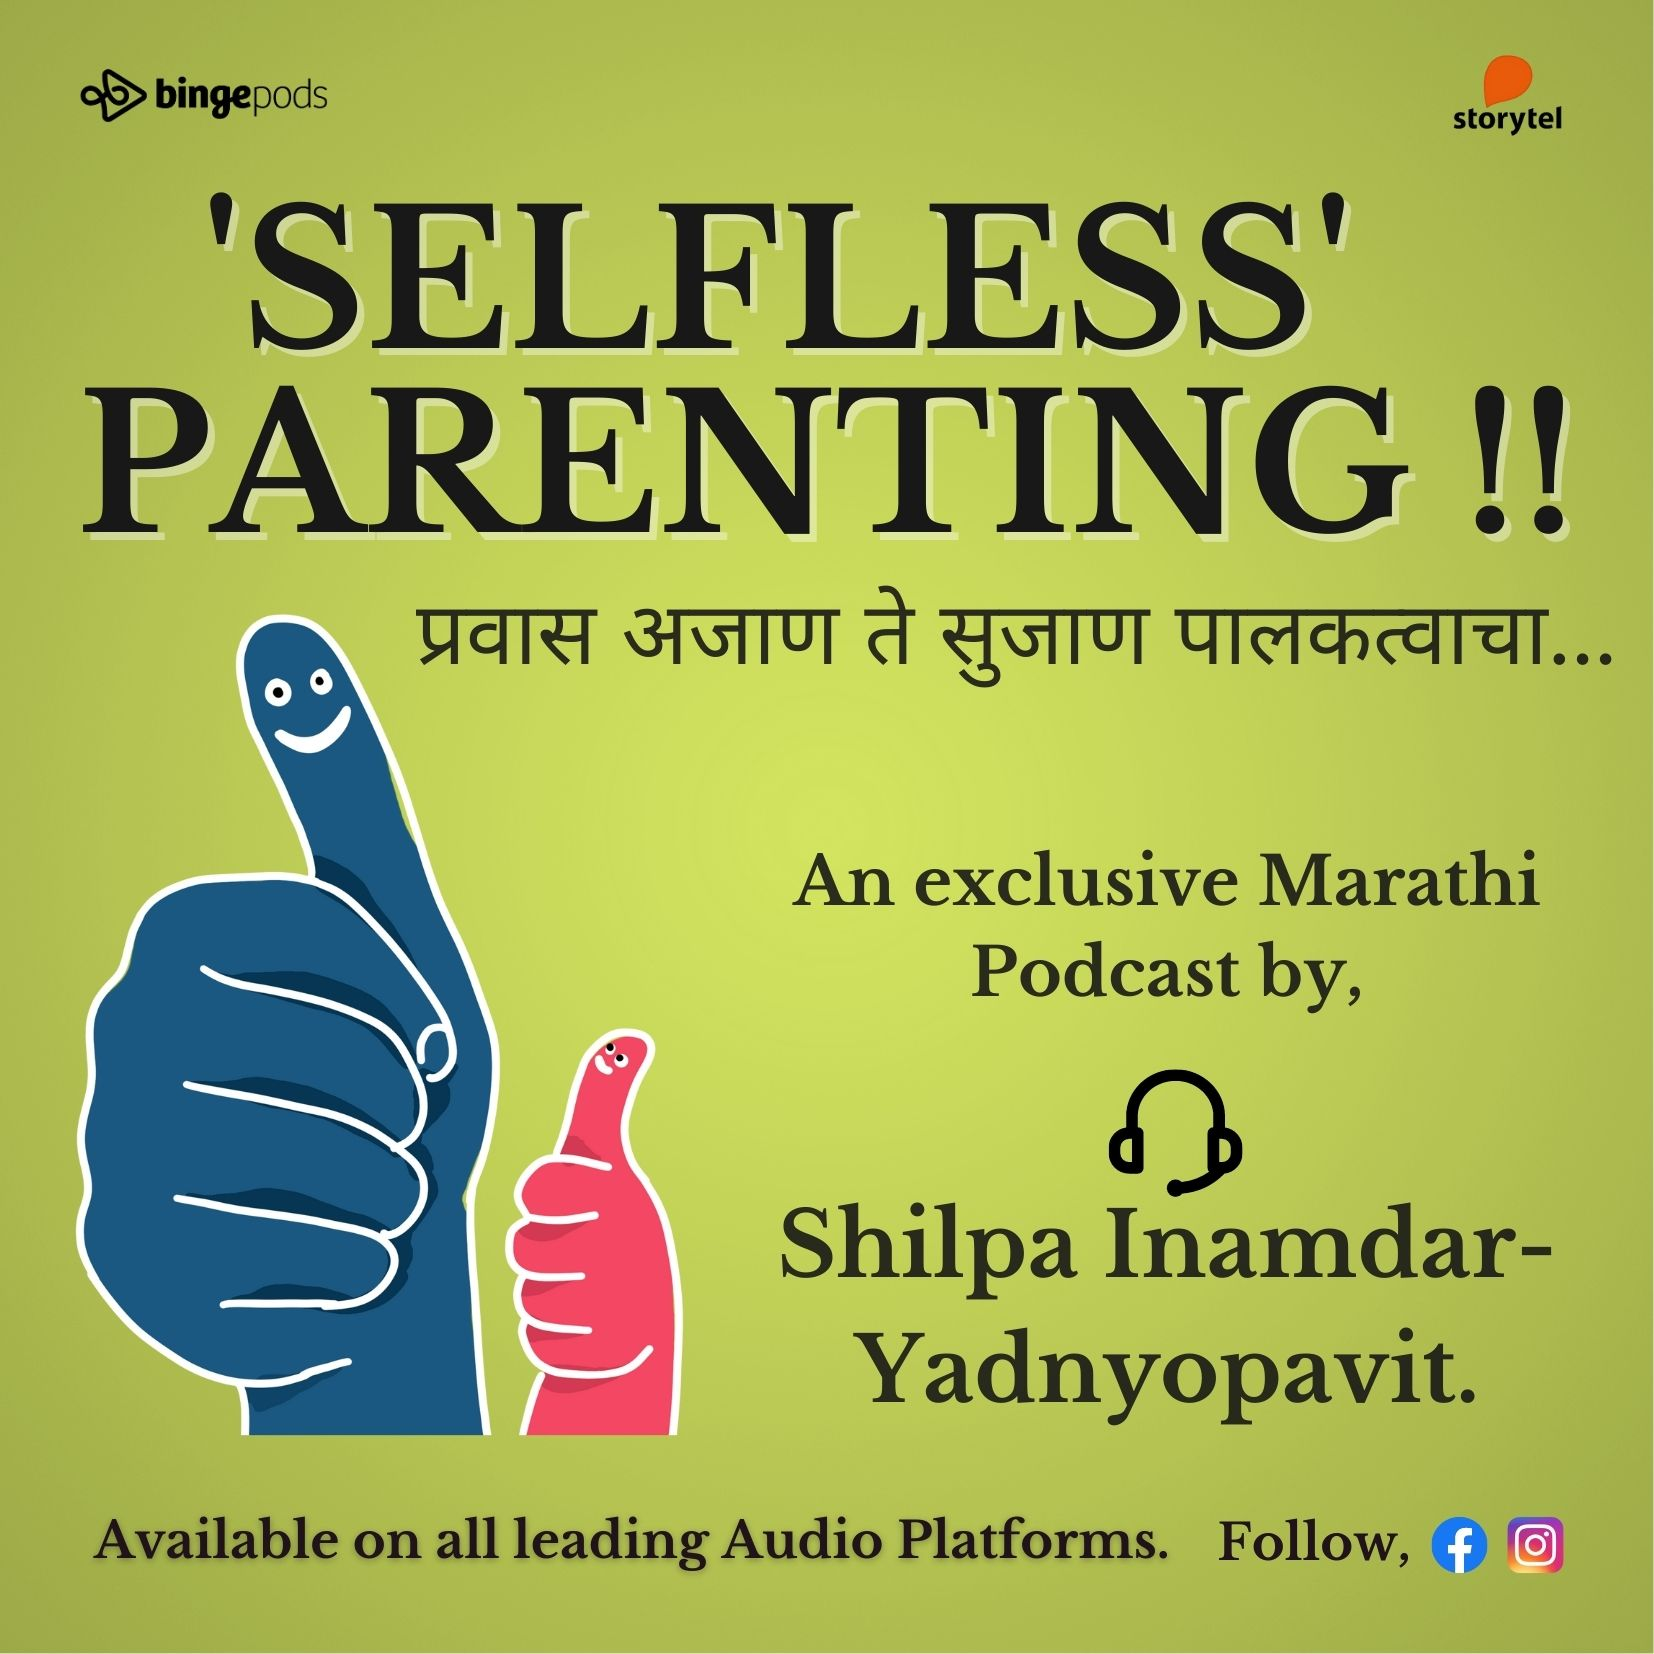 'Selfless' Parenting !!! [An exclusive Marathi podcast by Shilpa]